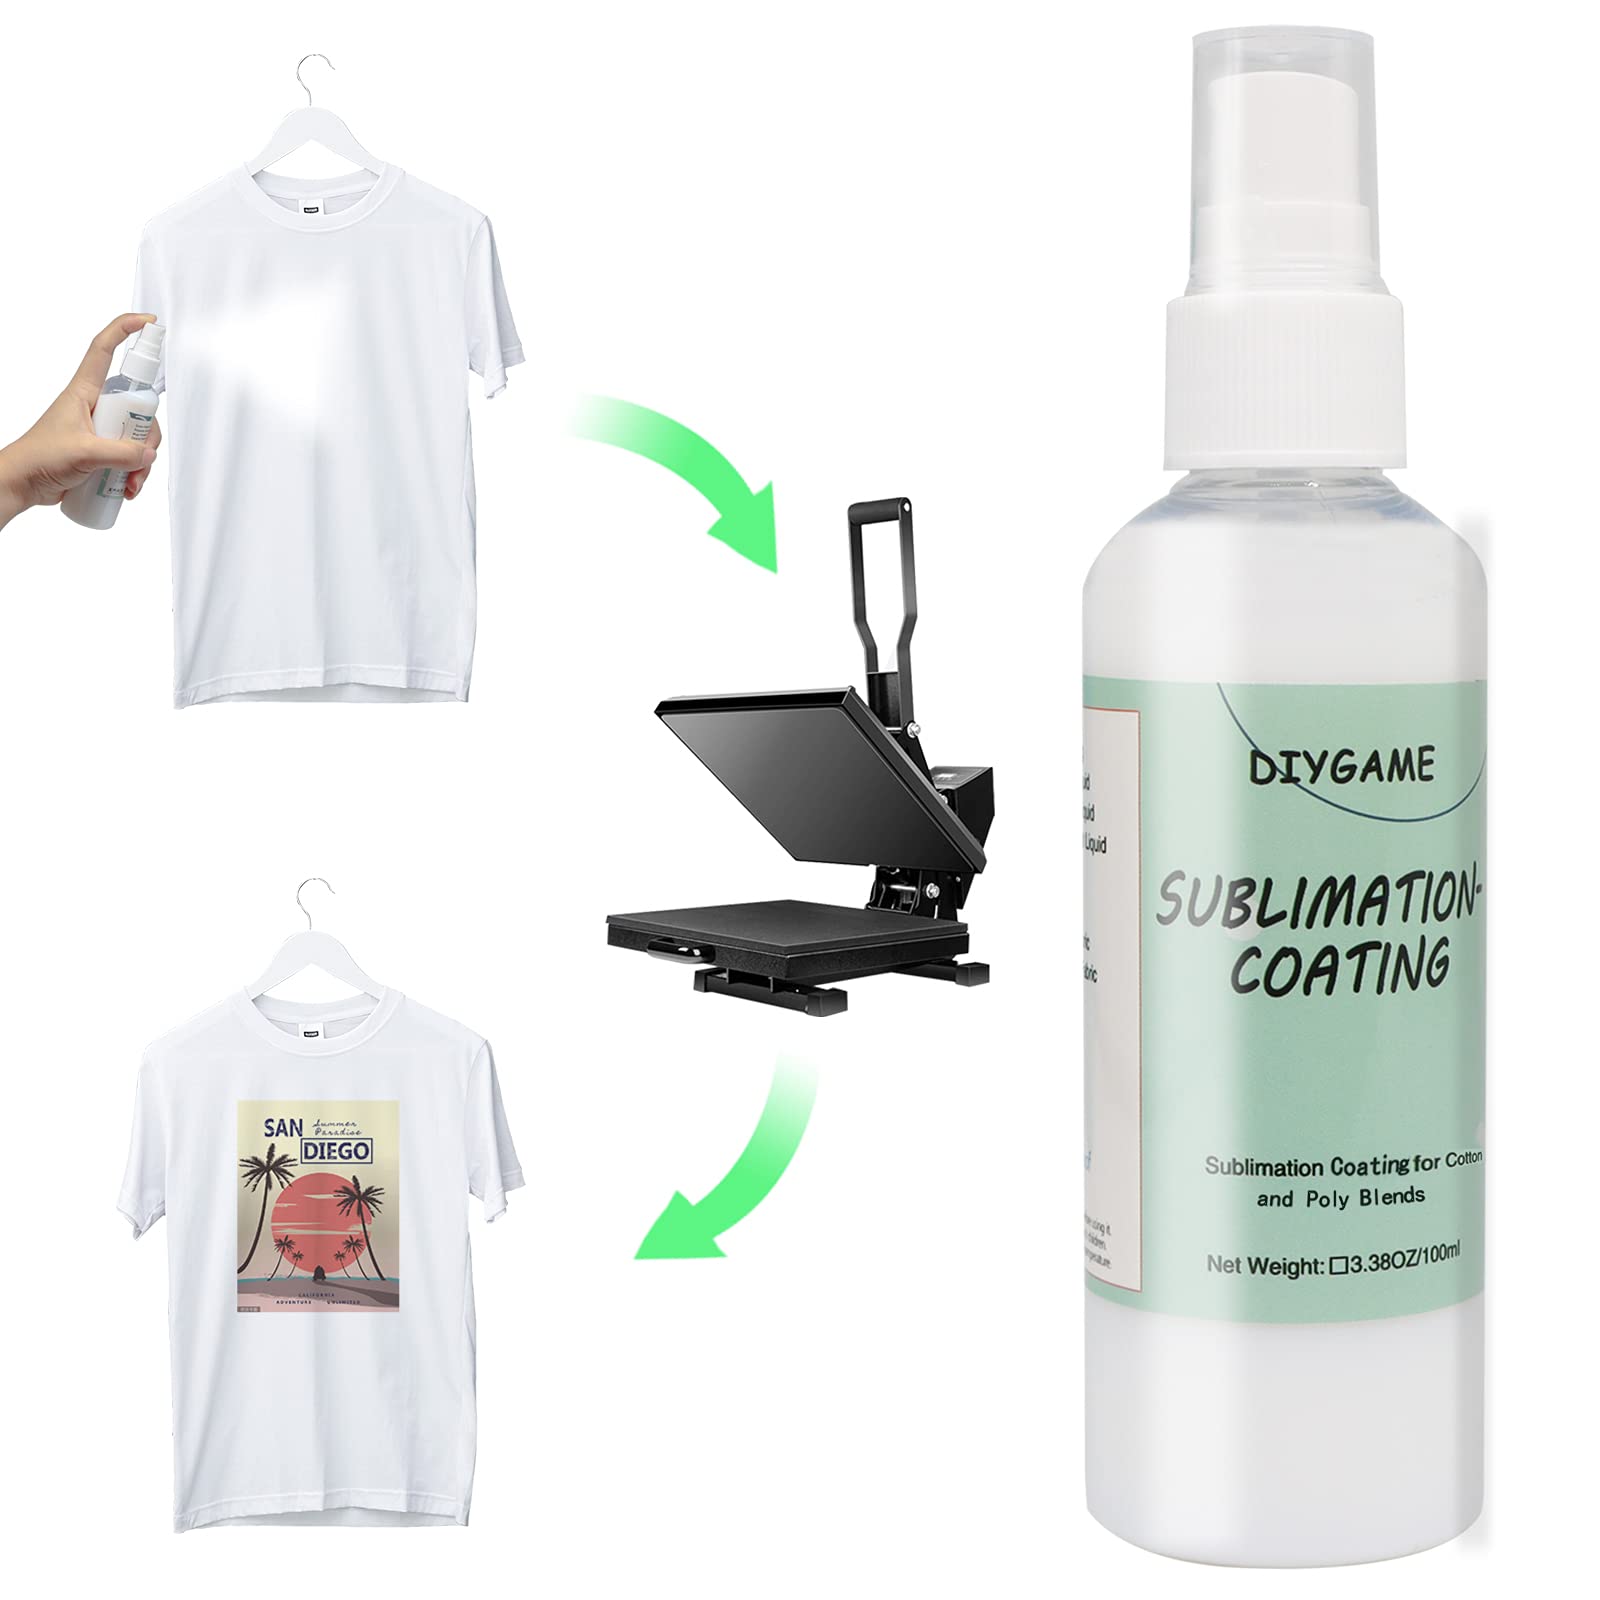 How to Make a Sublimation Spray for Cotton useful for clothes